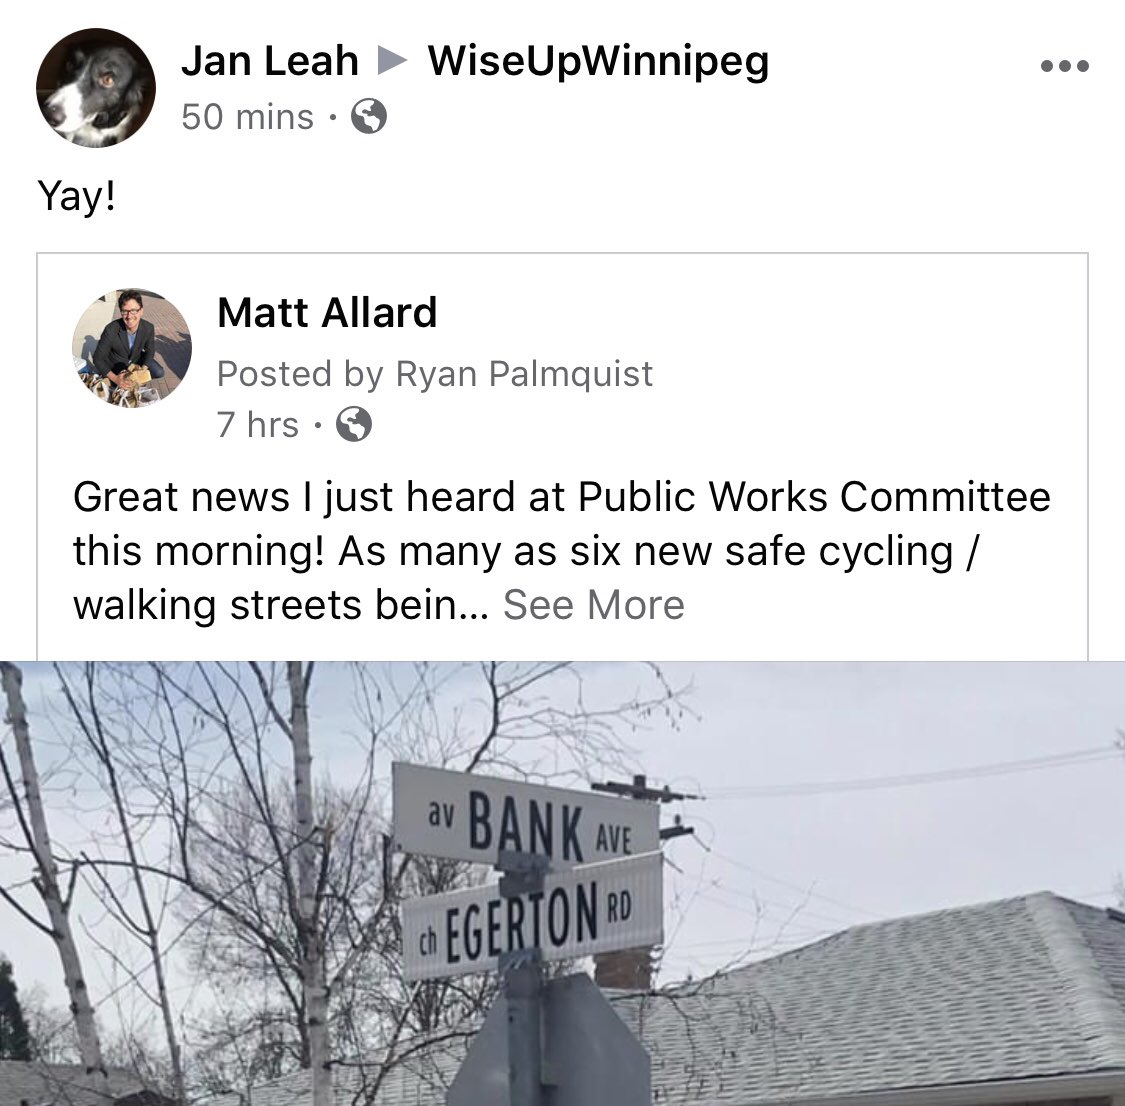 THREAD on Winnipeg poltics & urban issues. When Councillor  @mathieuallard discusses bikes or pedestrians or transit on Facebook, posts very often gets shared to a Facebook group called Wise Up Winnipeg. Often its someone named Jan Leah who does it. She seems angry. 1/